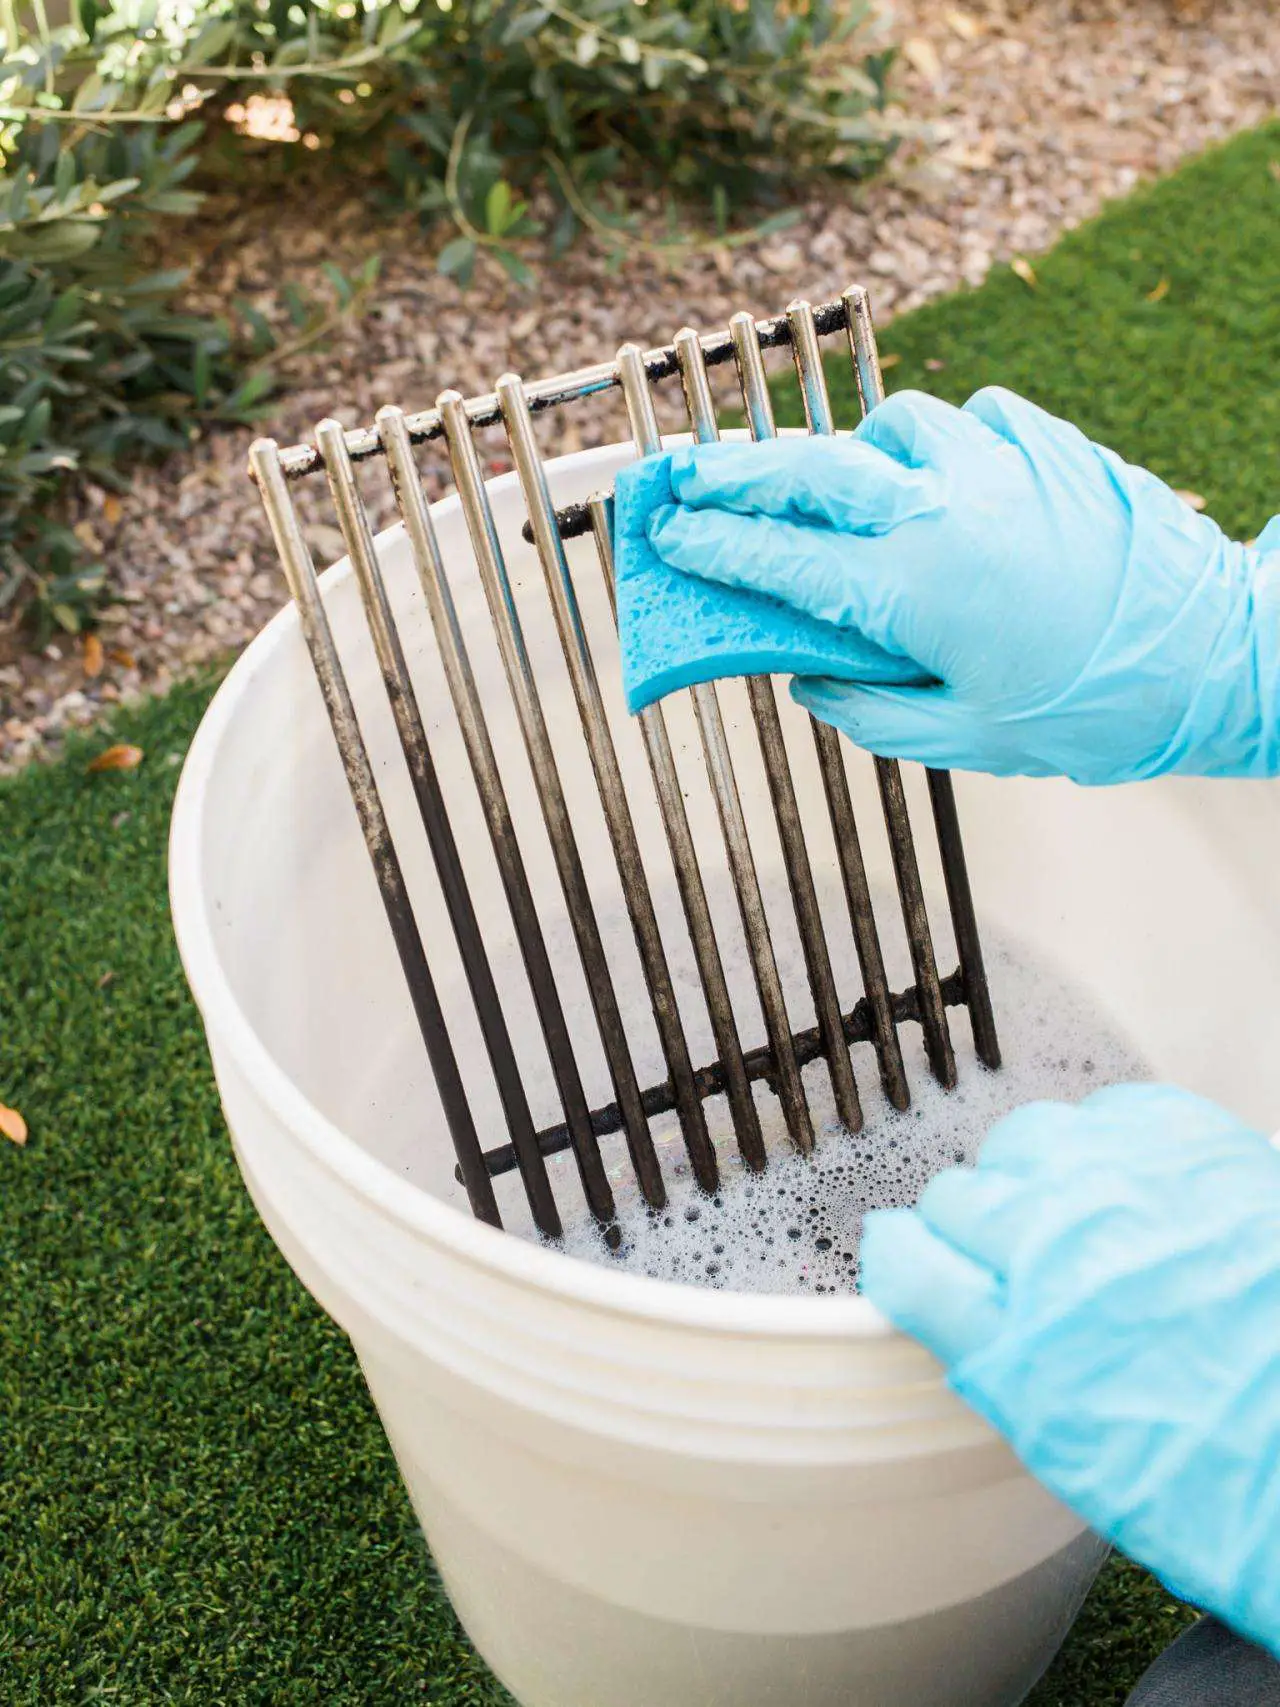 How to Deep Clean Your Grill